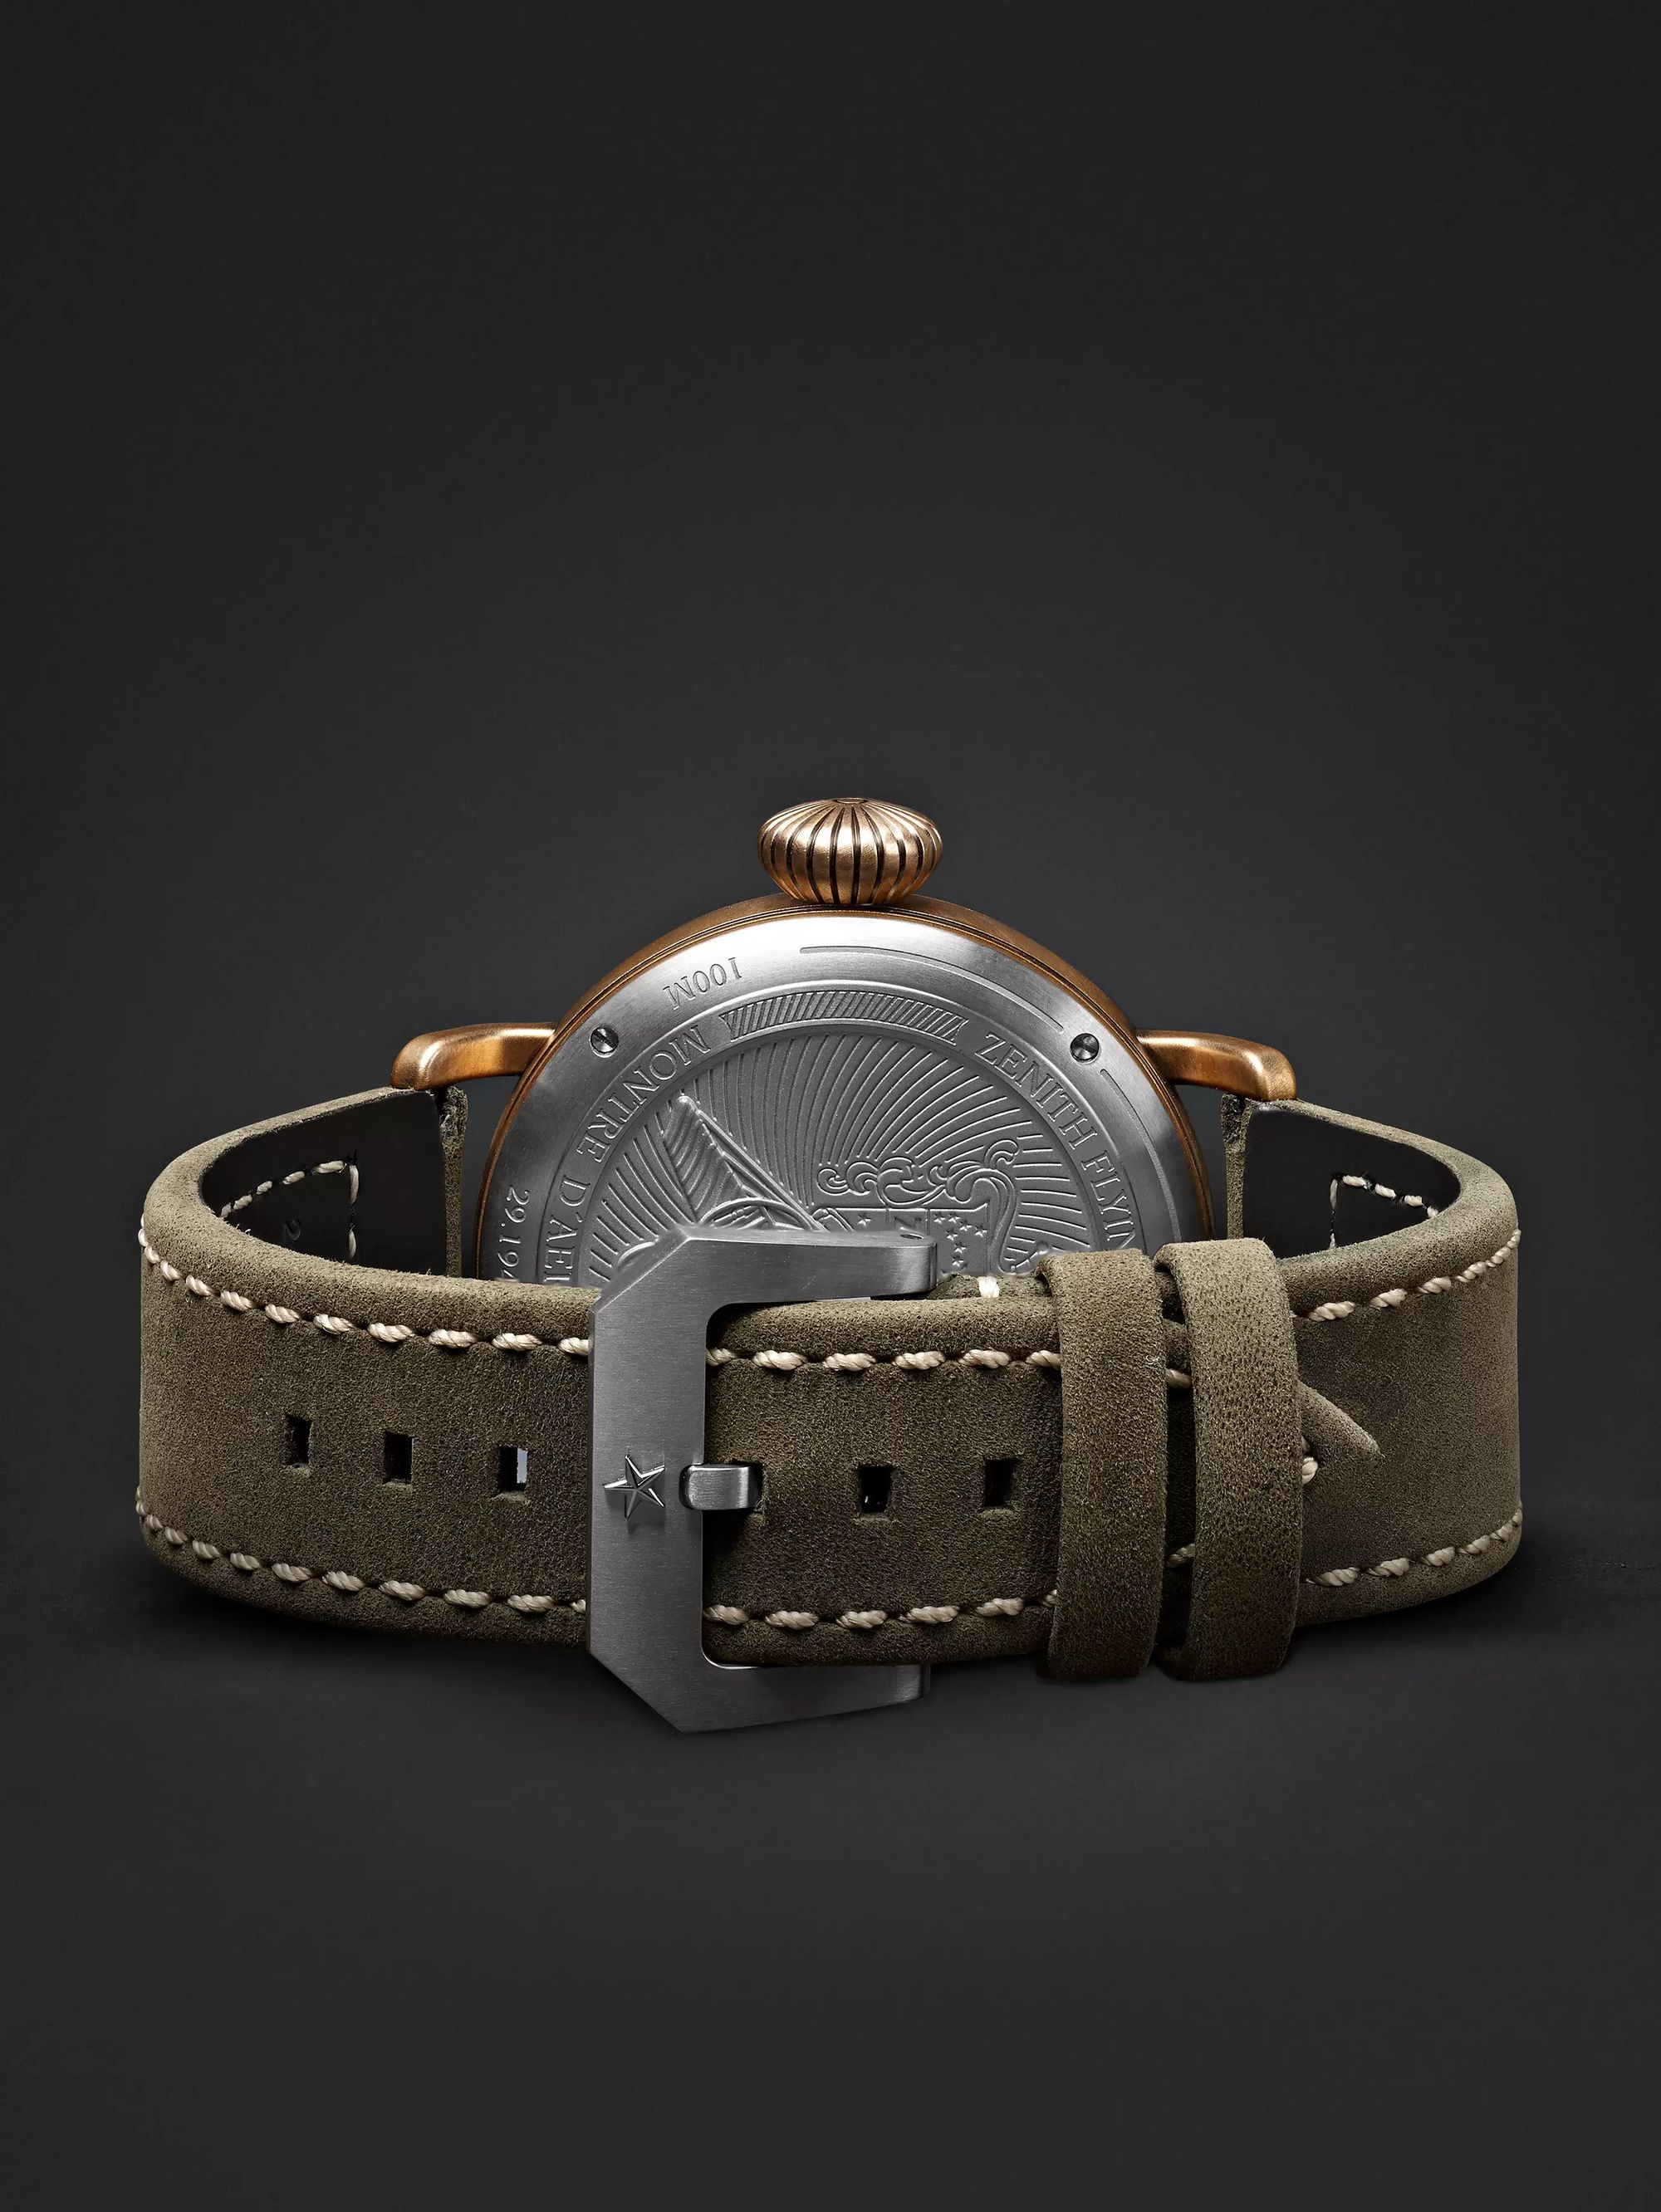 ZENITH Pilot Type 20 Extra Special Automatic 40mm Bronze and Nubuck Watch